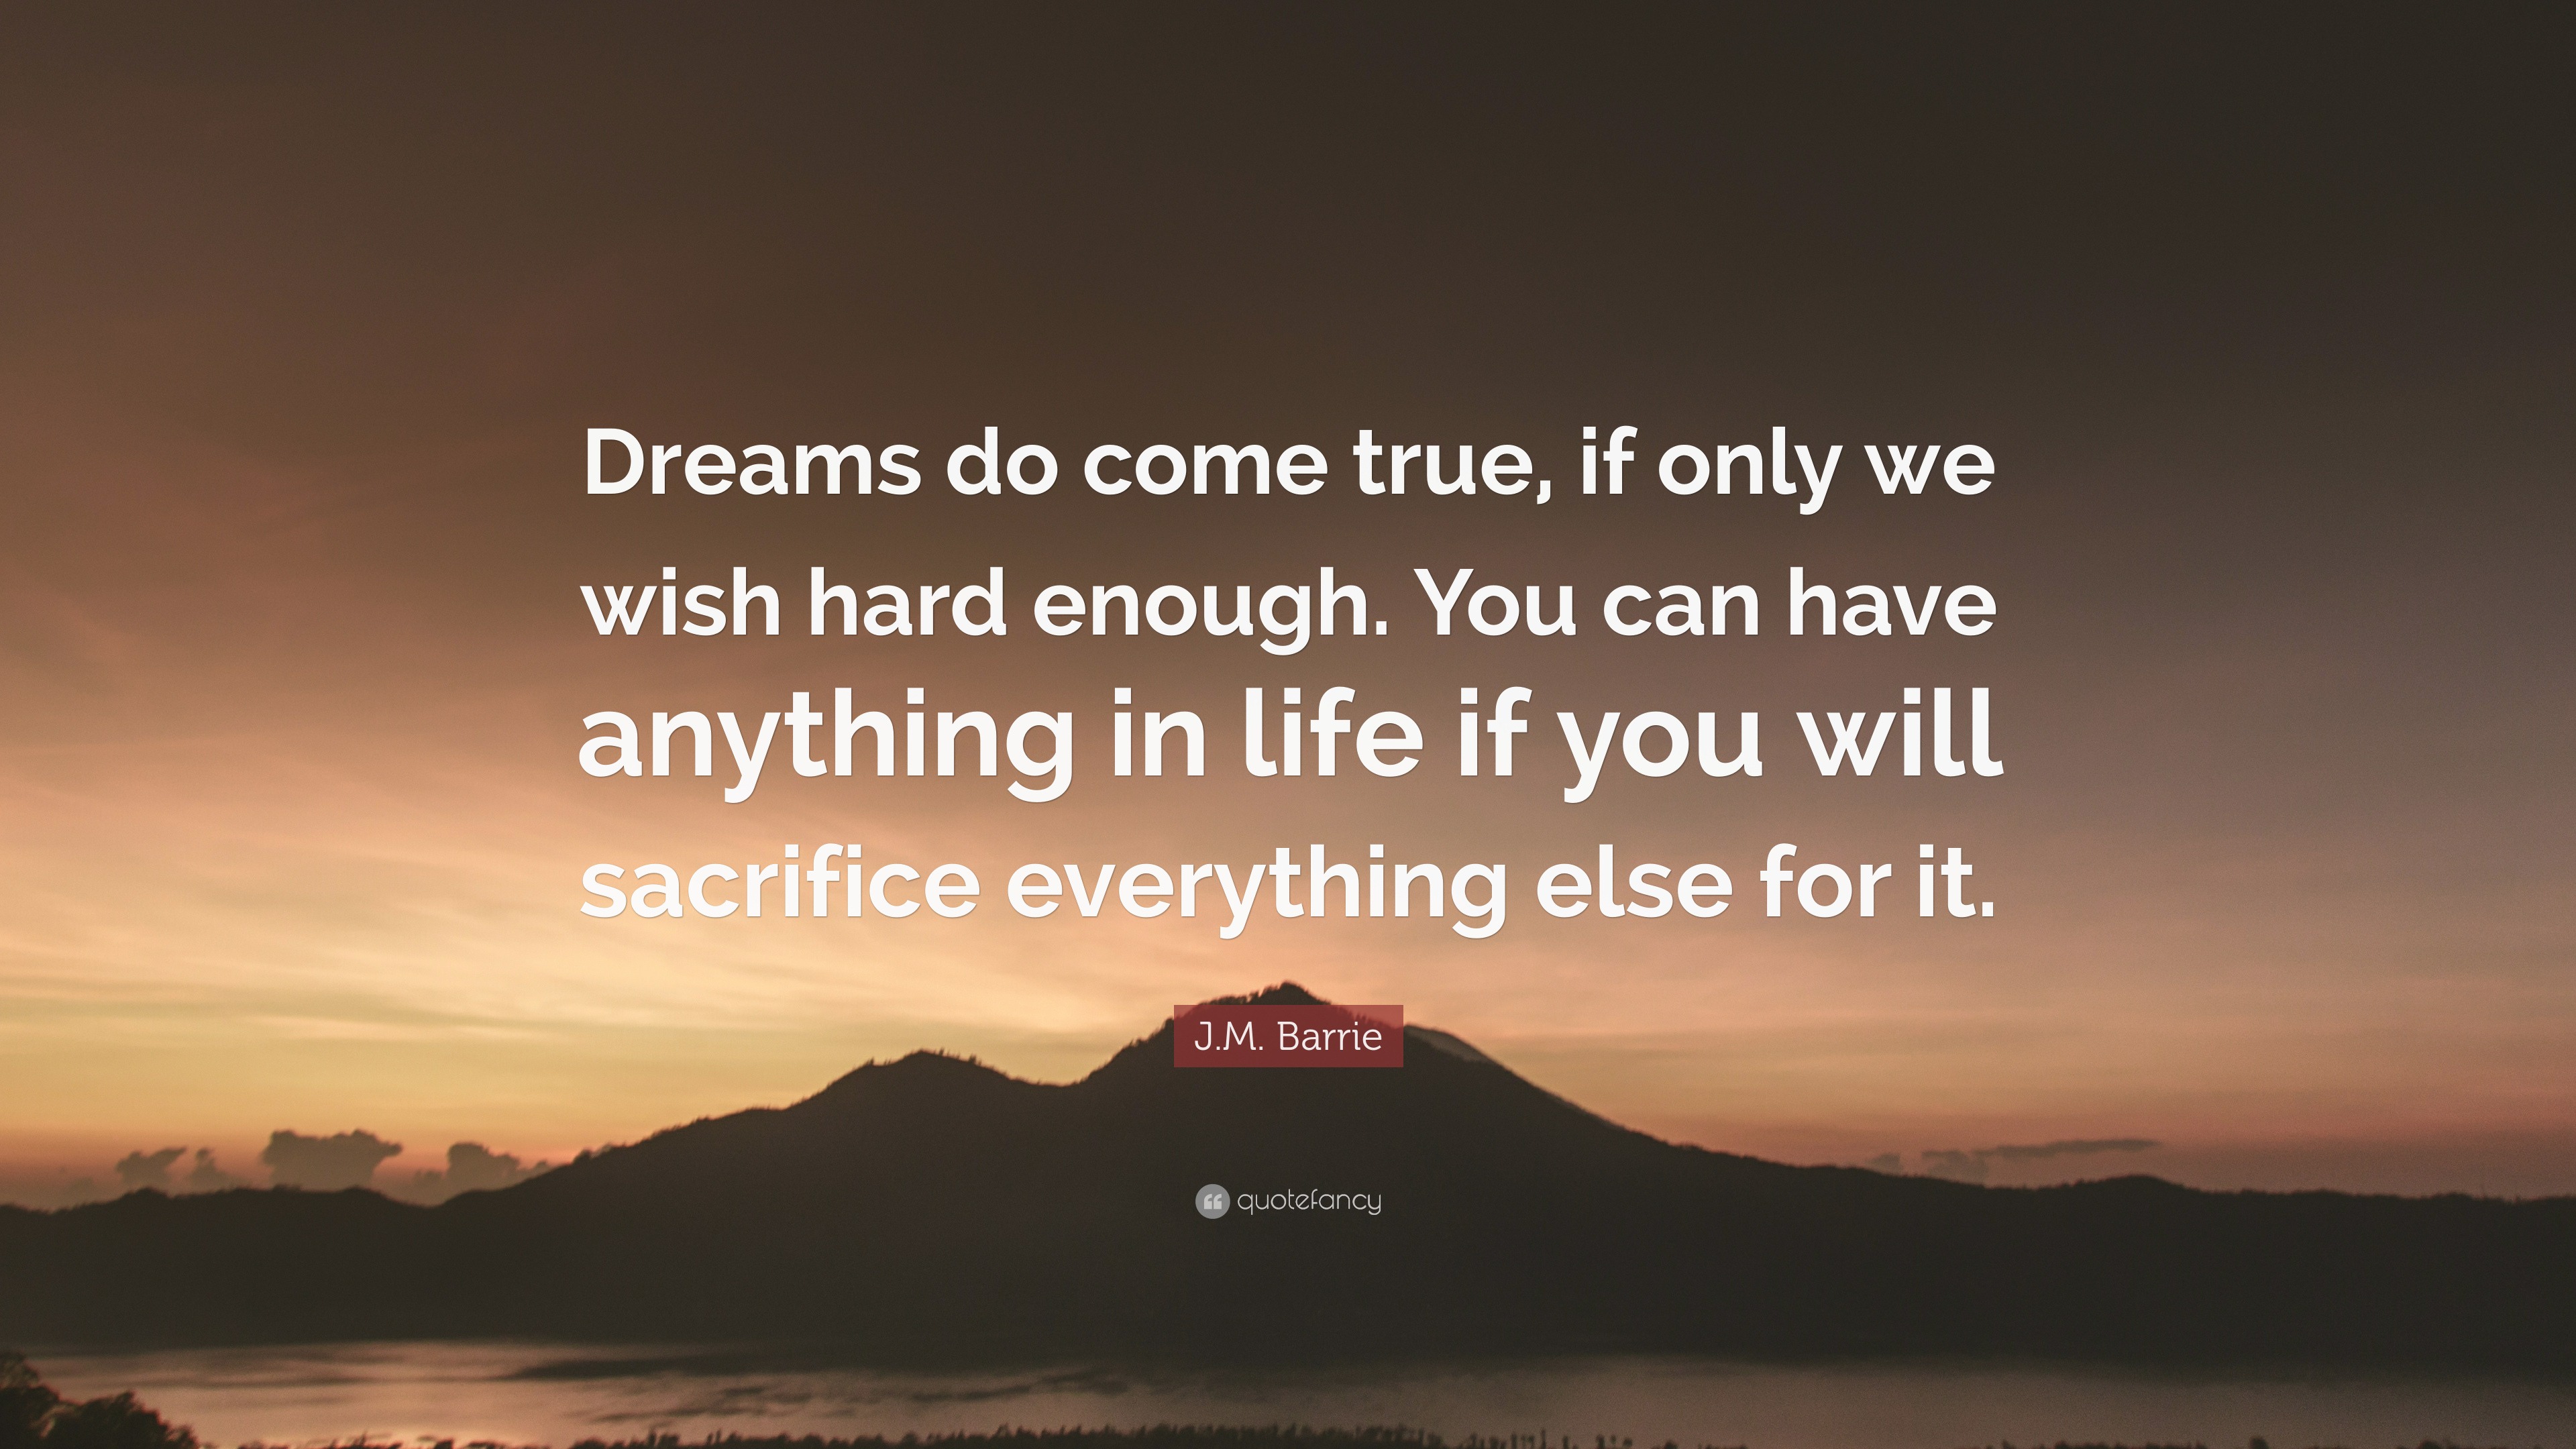 J.M. Barrie Quote: “Dreams do come true, if only we wish hard enough ...